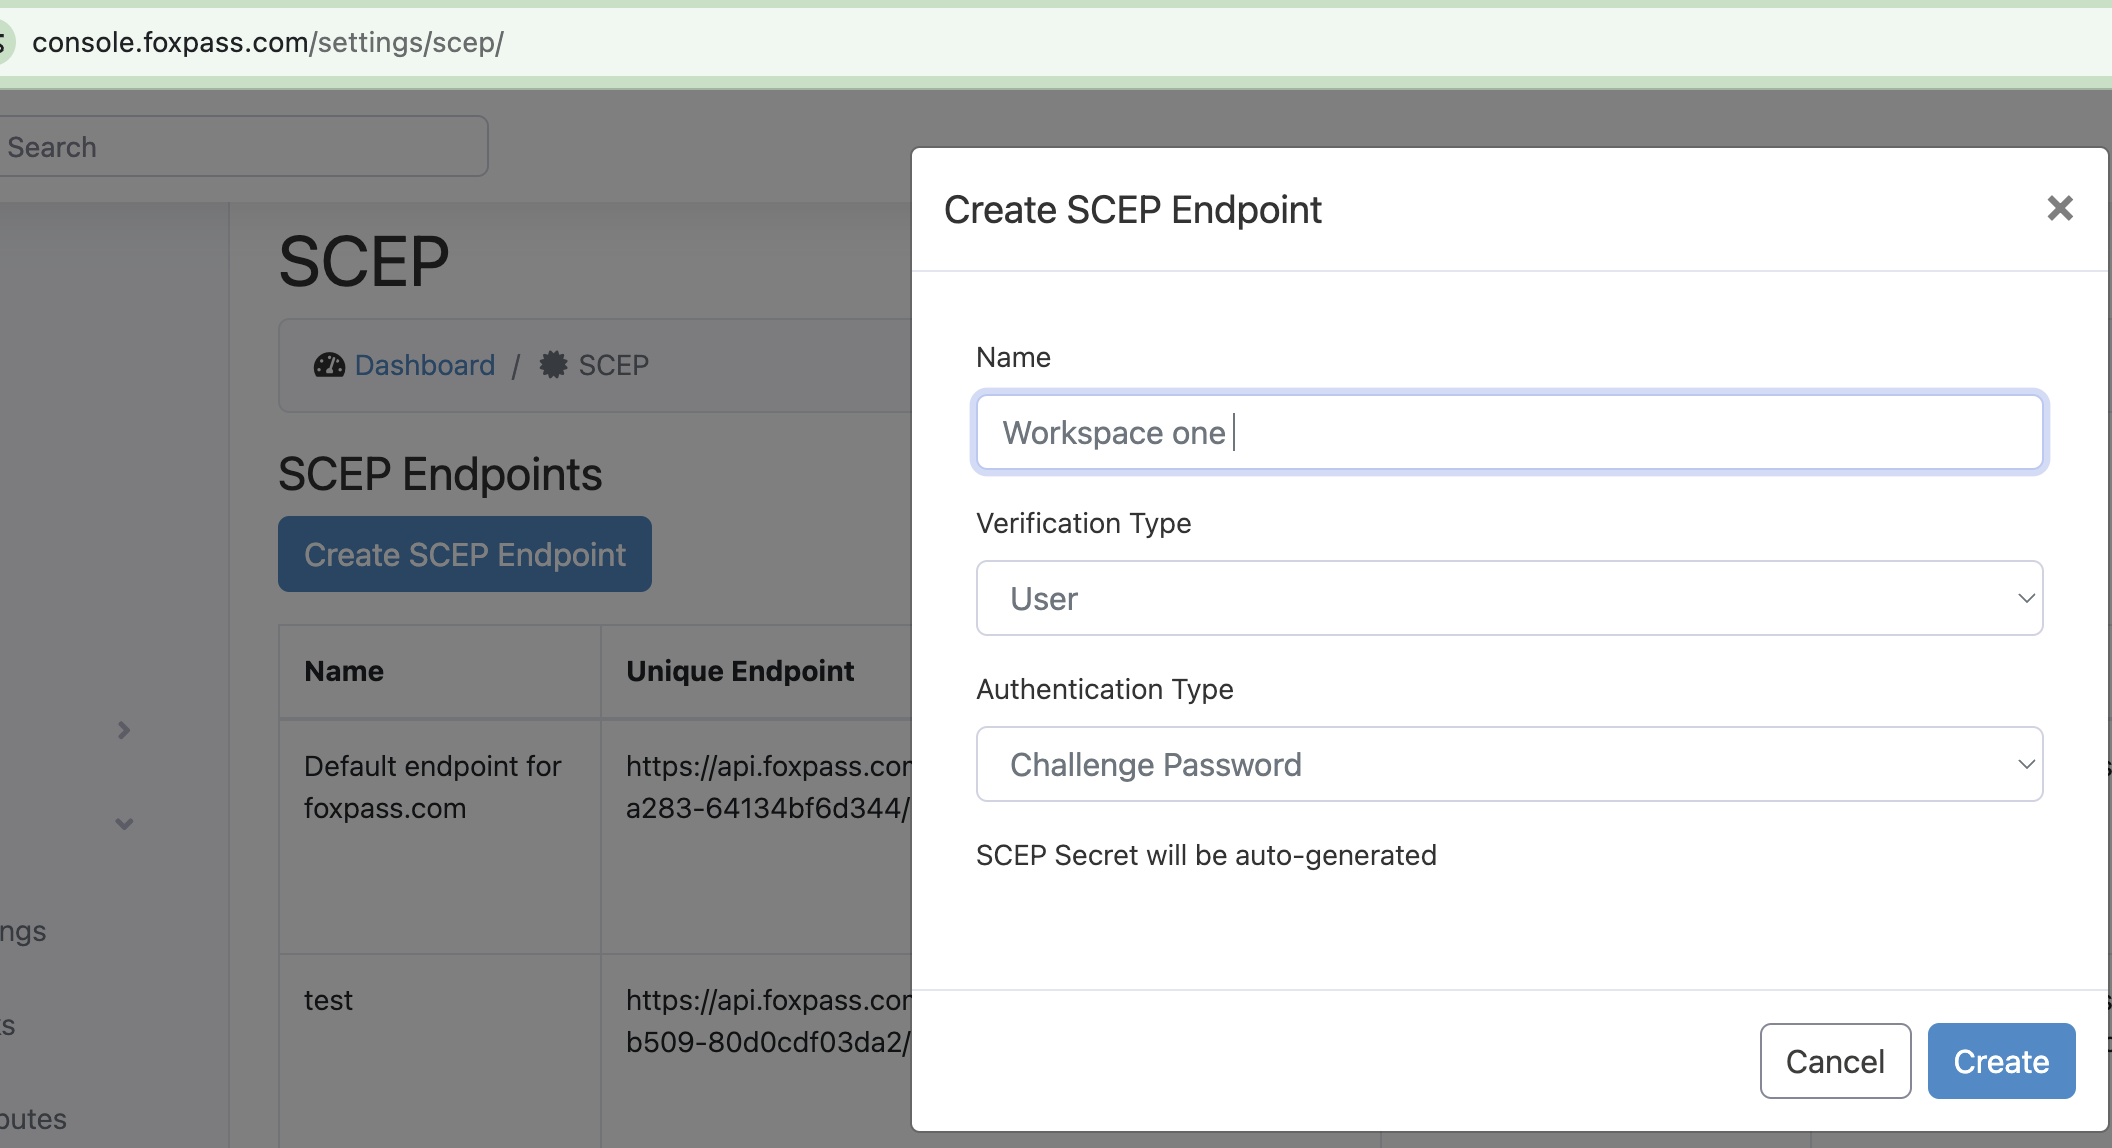 Create SCEP endpoint in Foxpass